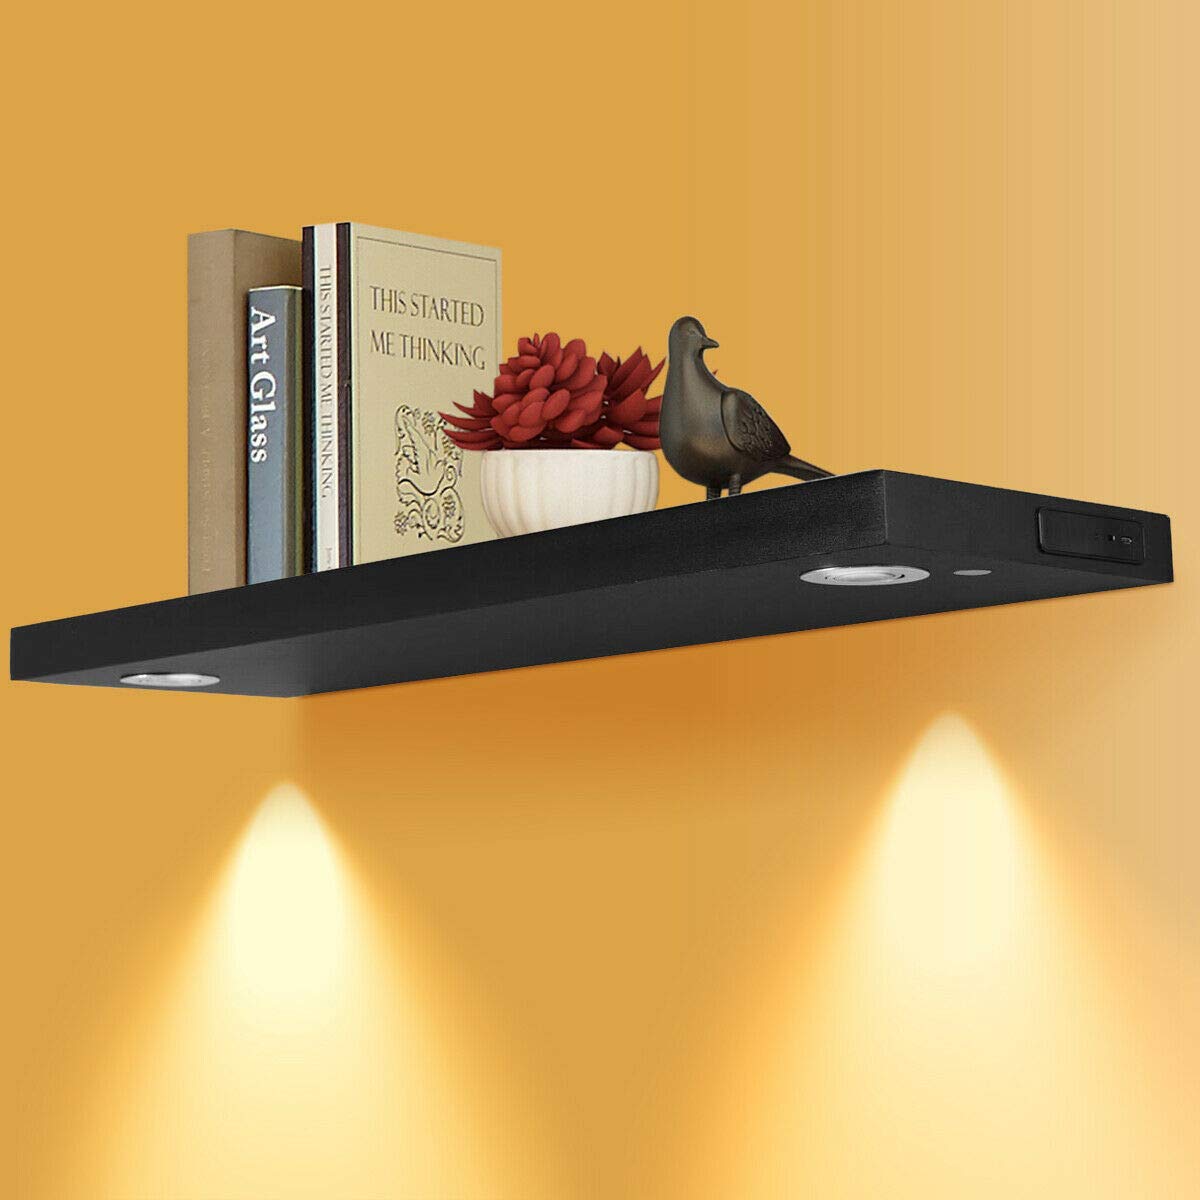 zon floating wall mounted shelf with led lights shelves underneath upgraded version built rechargeable battery powered light intensity control energy saving wood shoe storage